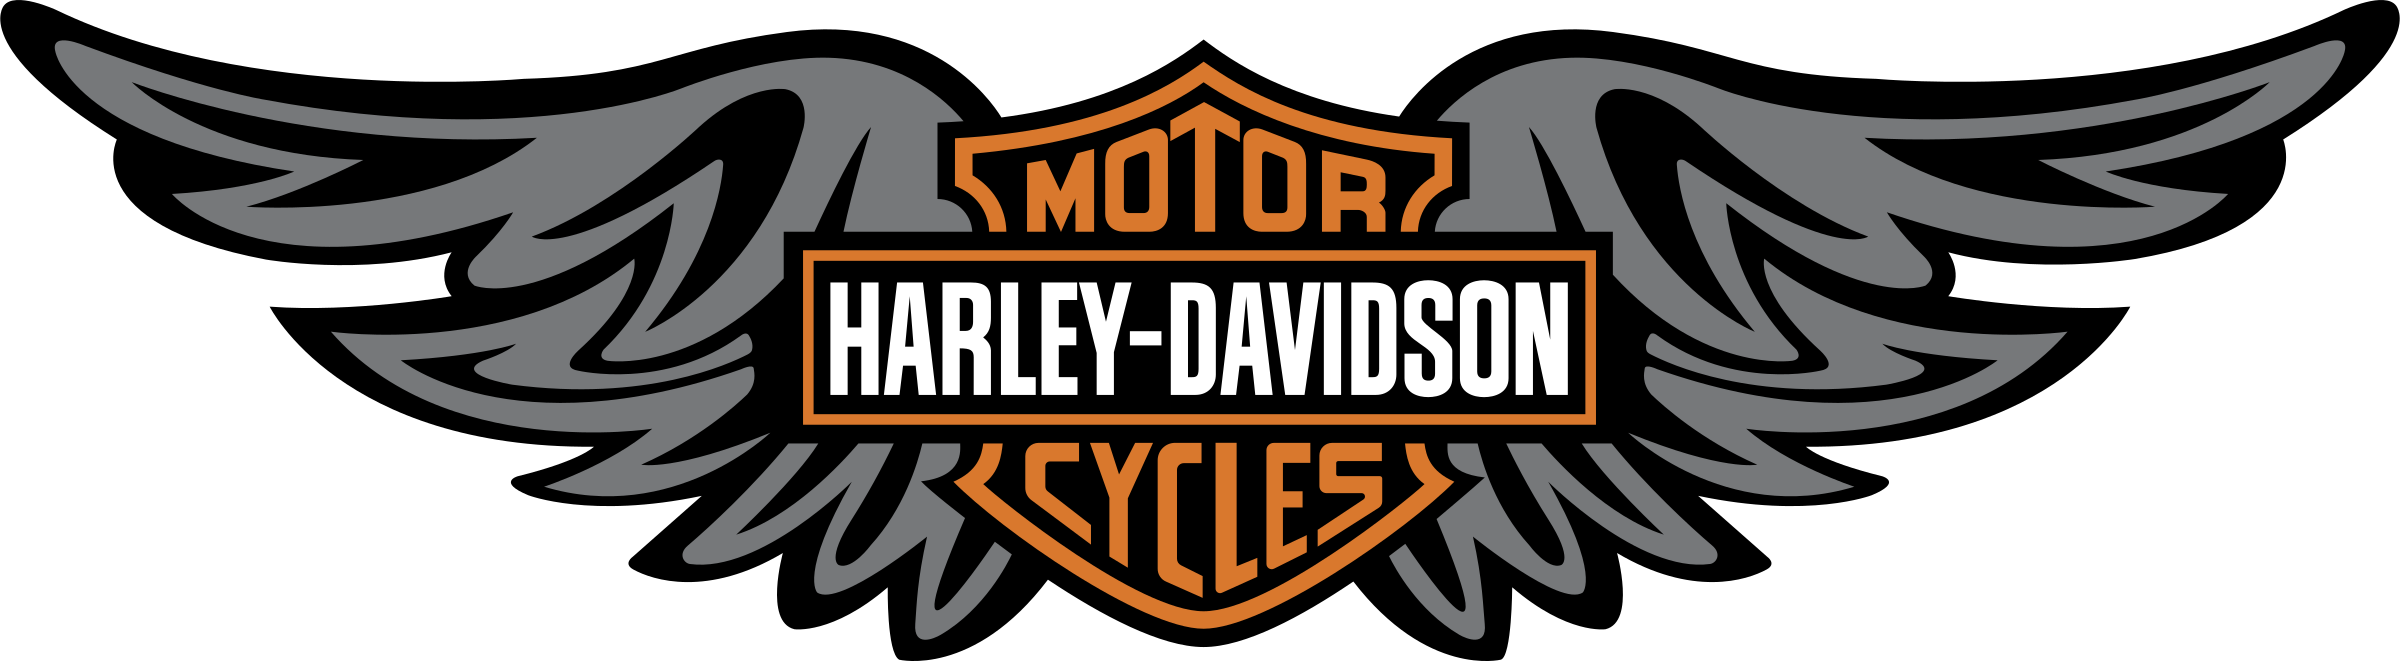 motorcycle, logo, harley png background hd download